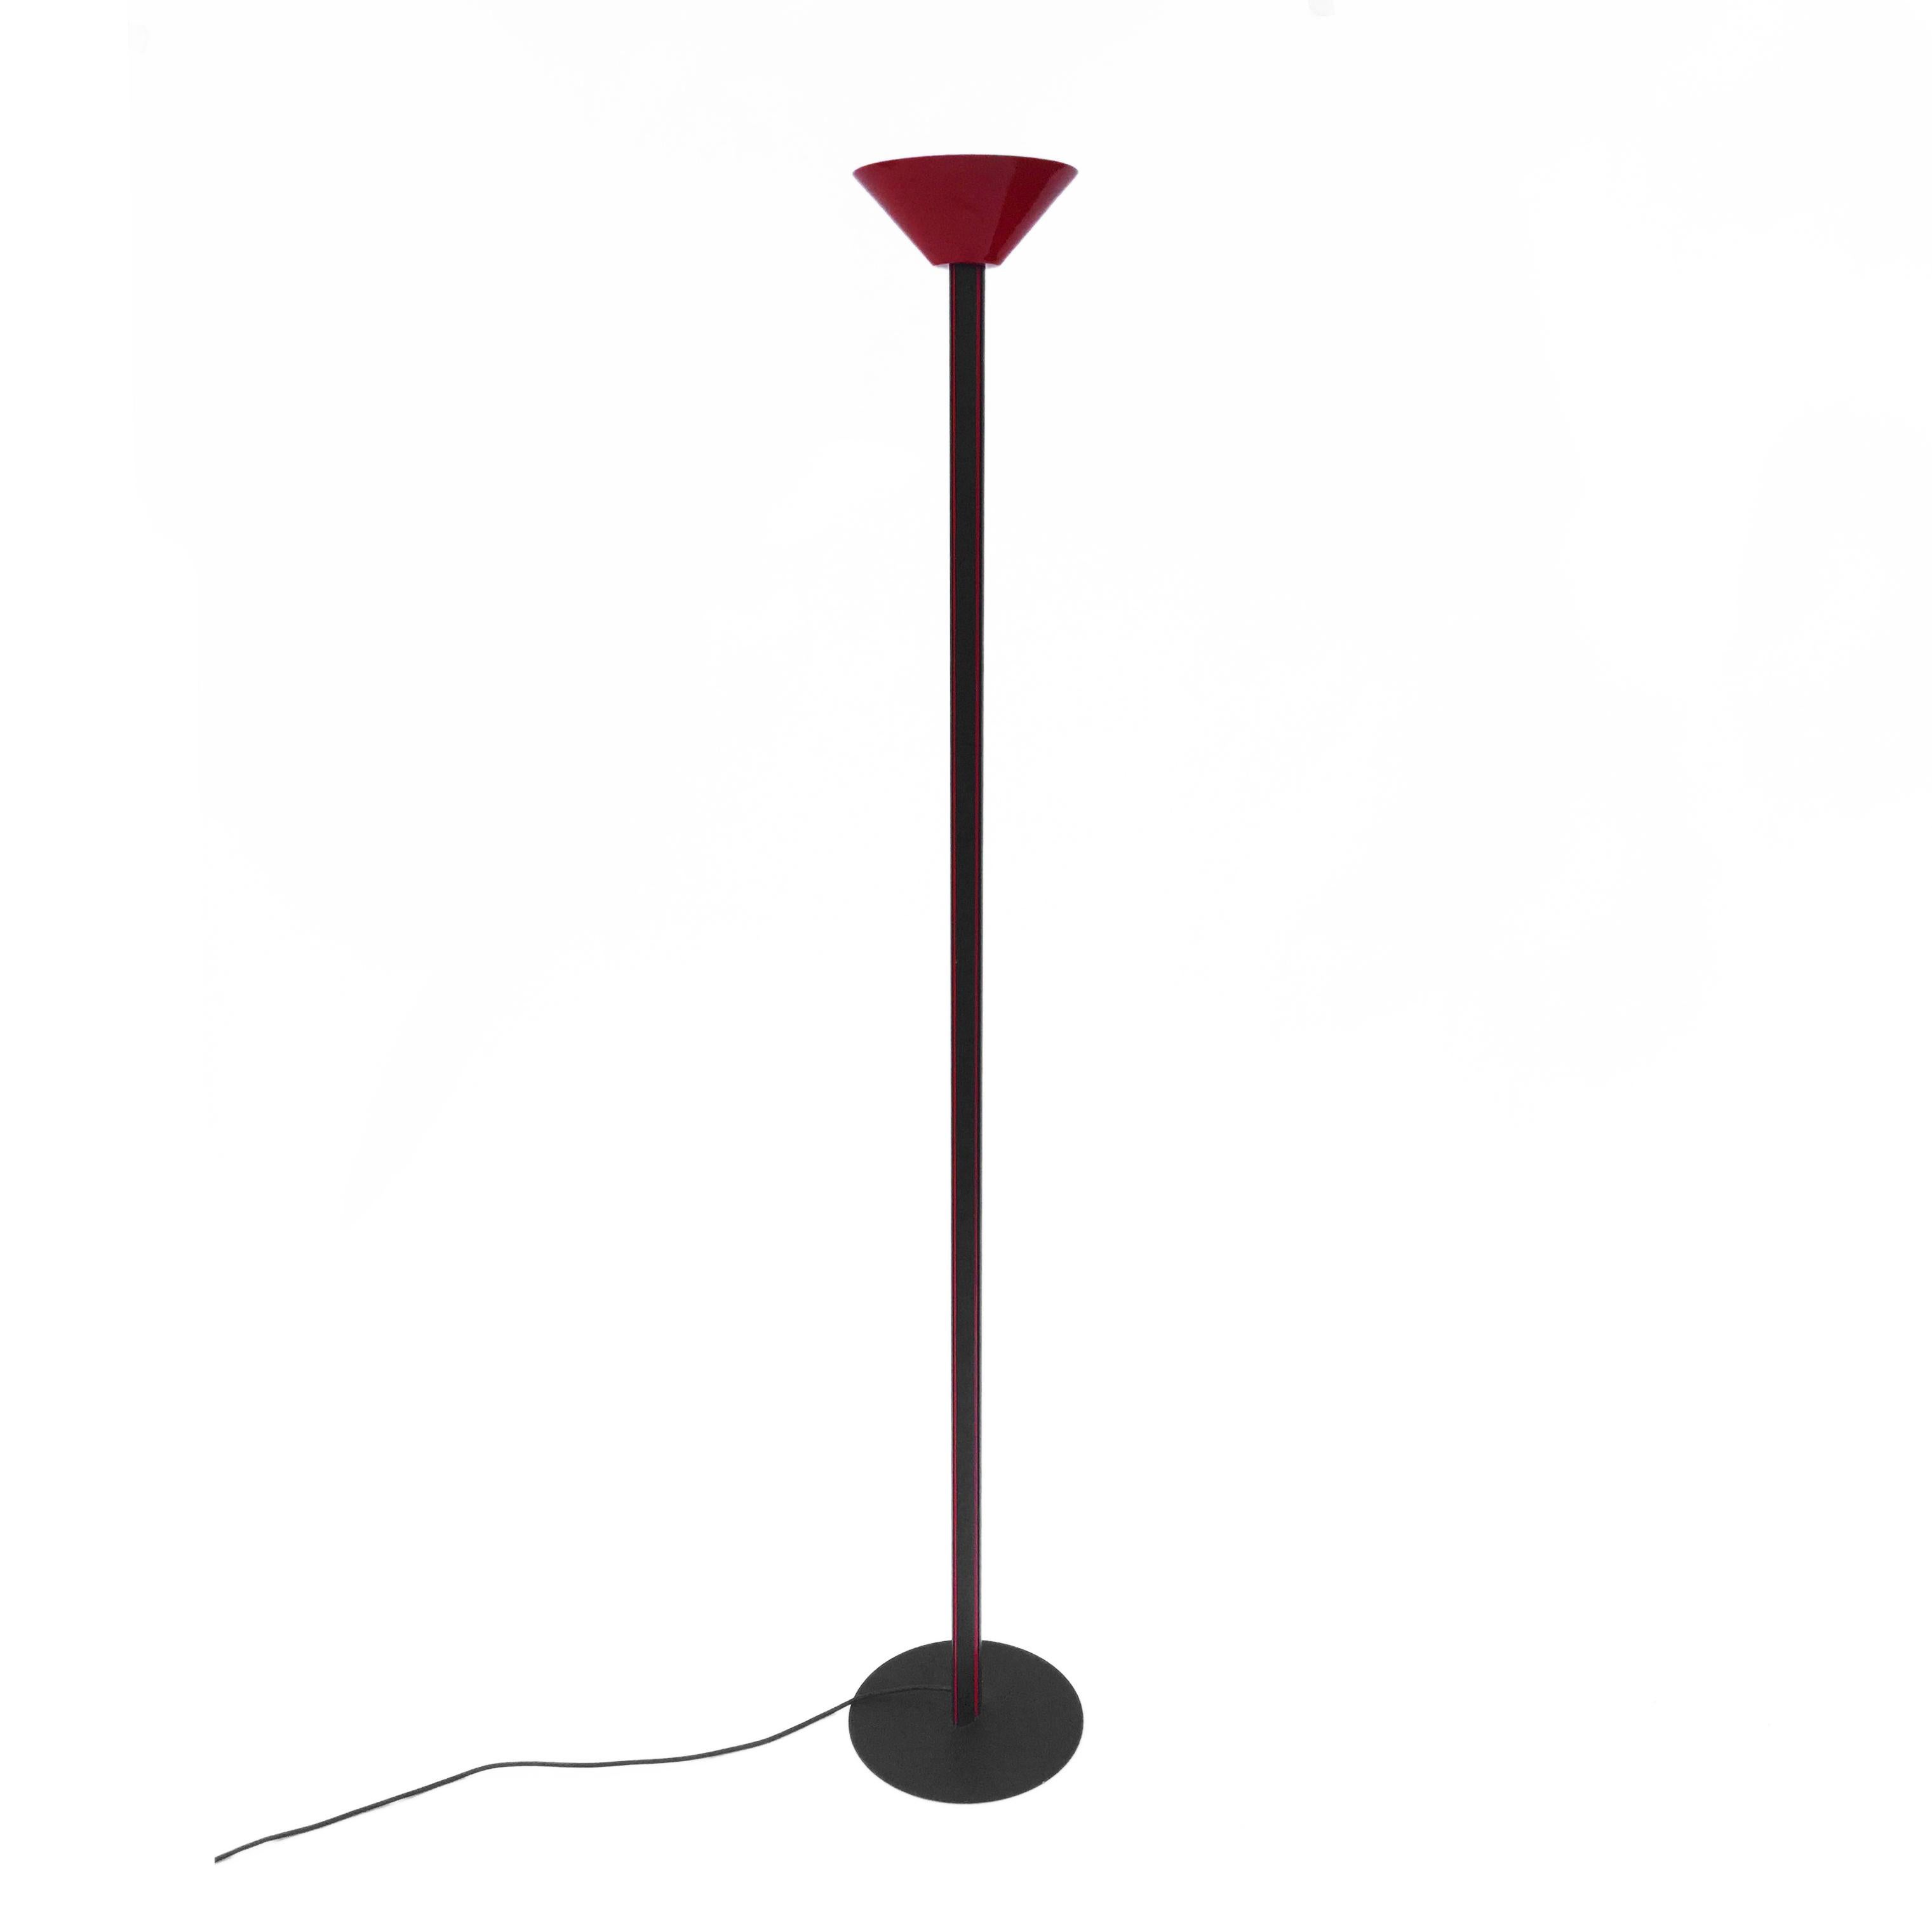 Memphis Group inspired of floor lamp by 1001 Lamps in black coated matte paint with red stripes body and red lacquered cone shaped shades similar to Ettore Sottsass' Callimaco lamp. Halogen lights. For accurate international shipping quote please